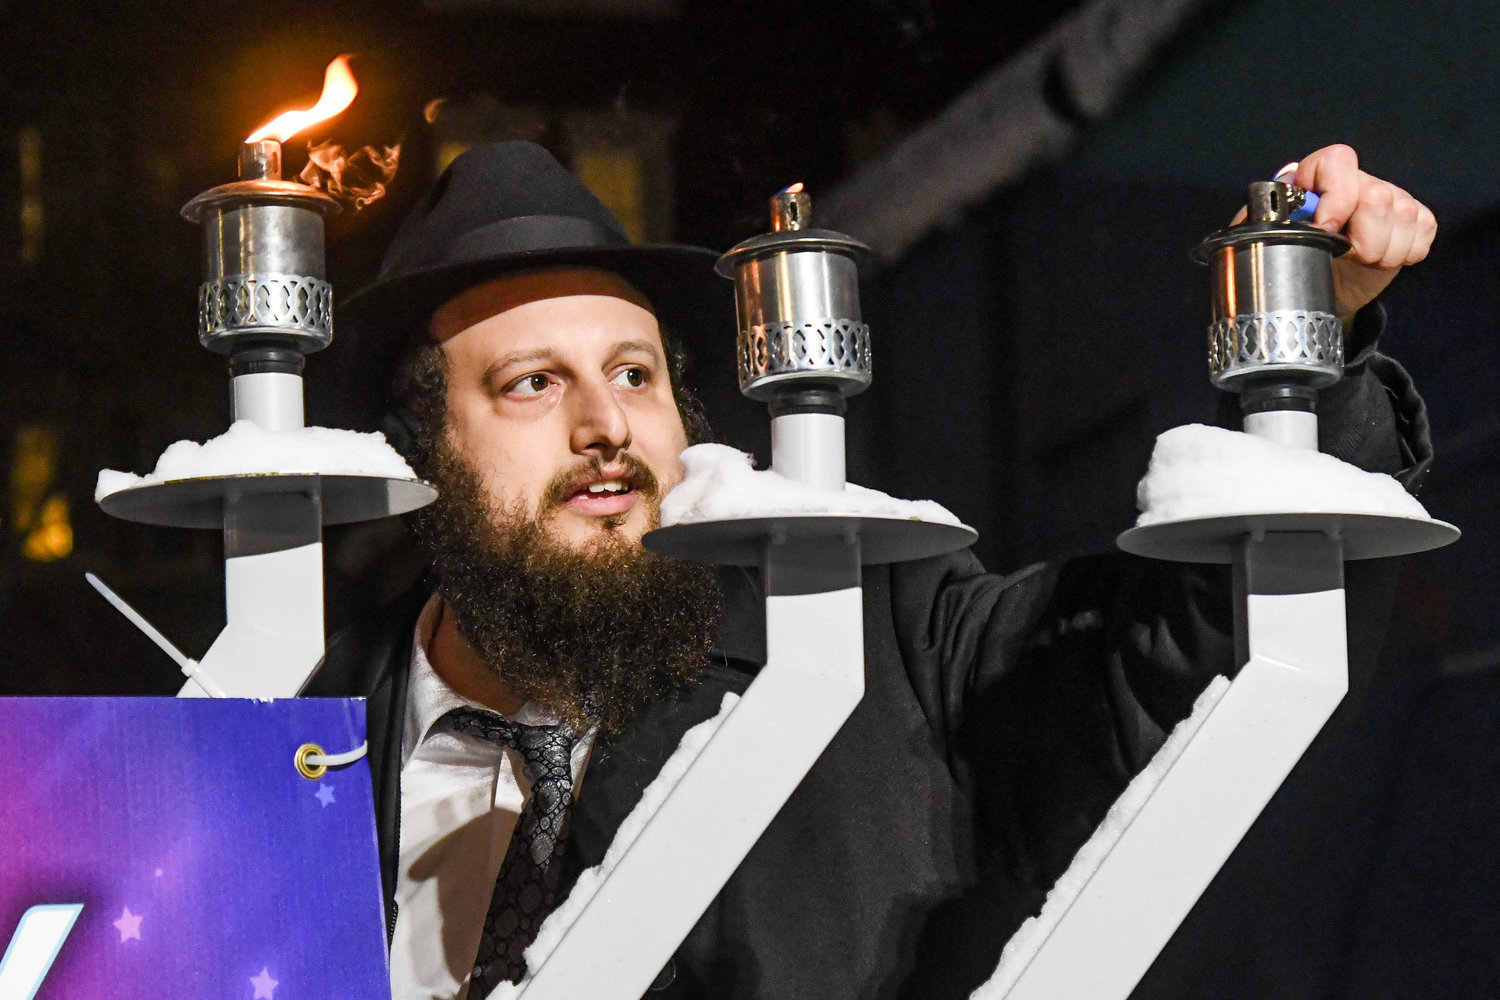 Rabbi Levi Yitzchok Charitonow from the Chabad of the Mohawk Valley lights a large menorah outside of Liberty Bell Park in celebration of Hanukkah on Tuesday, Dec. 20 in Utica.